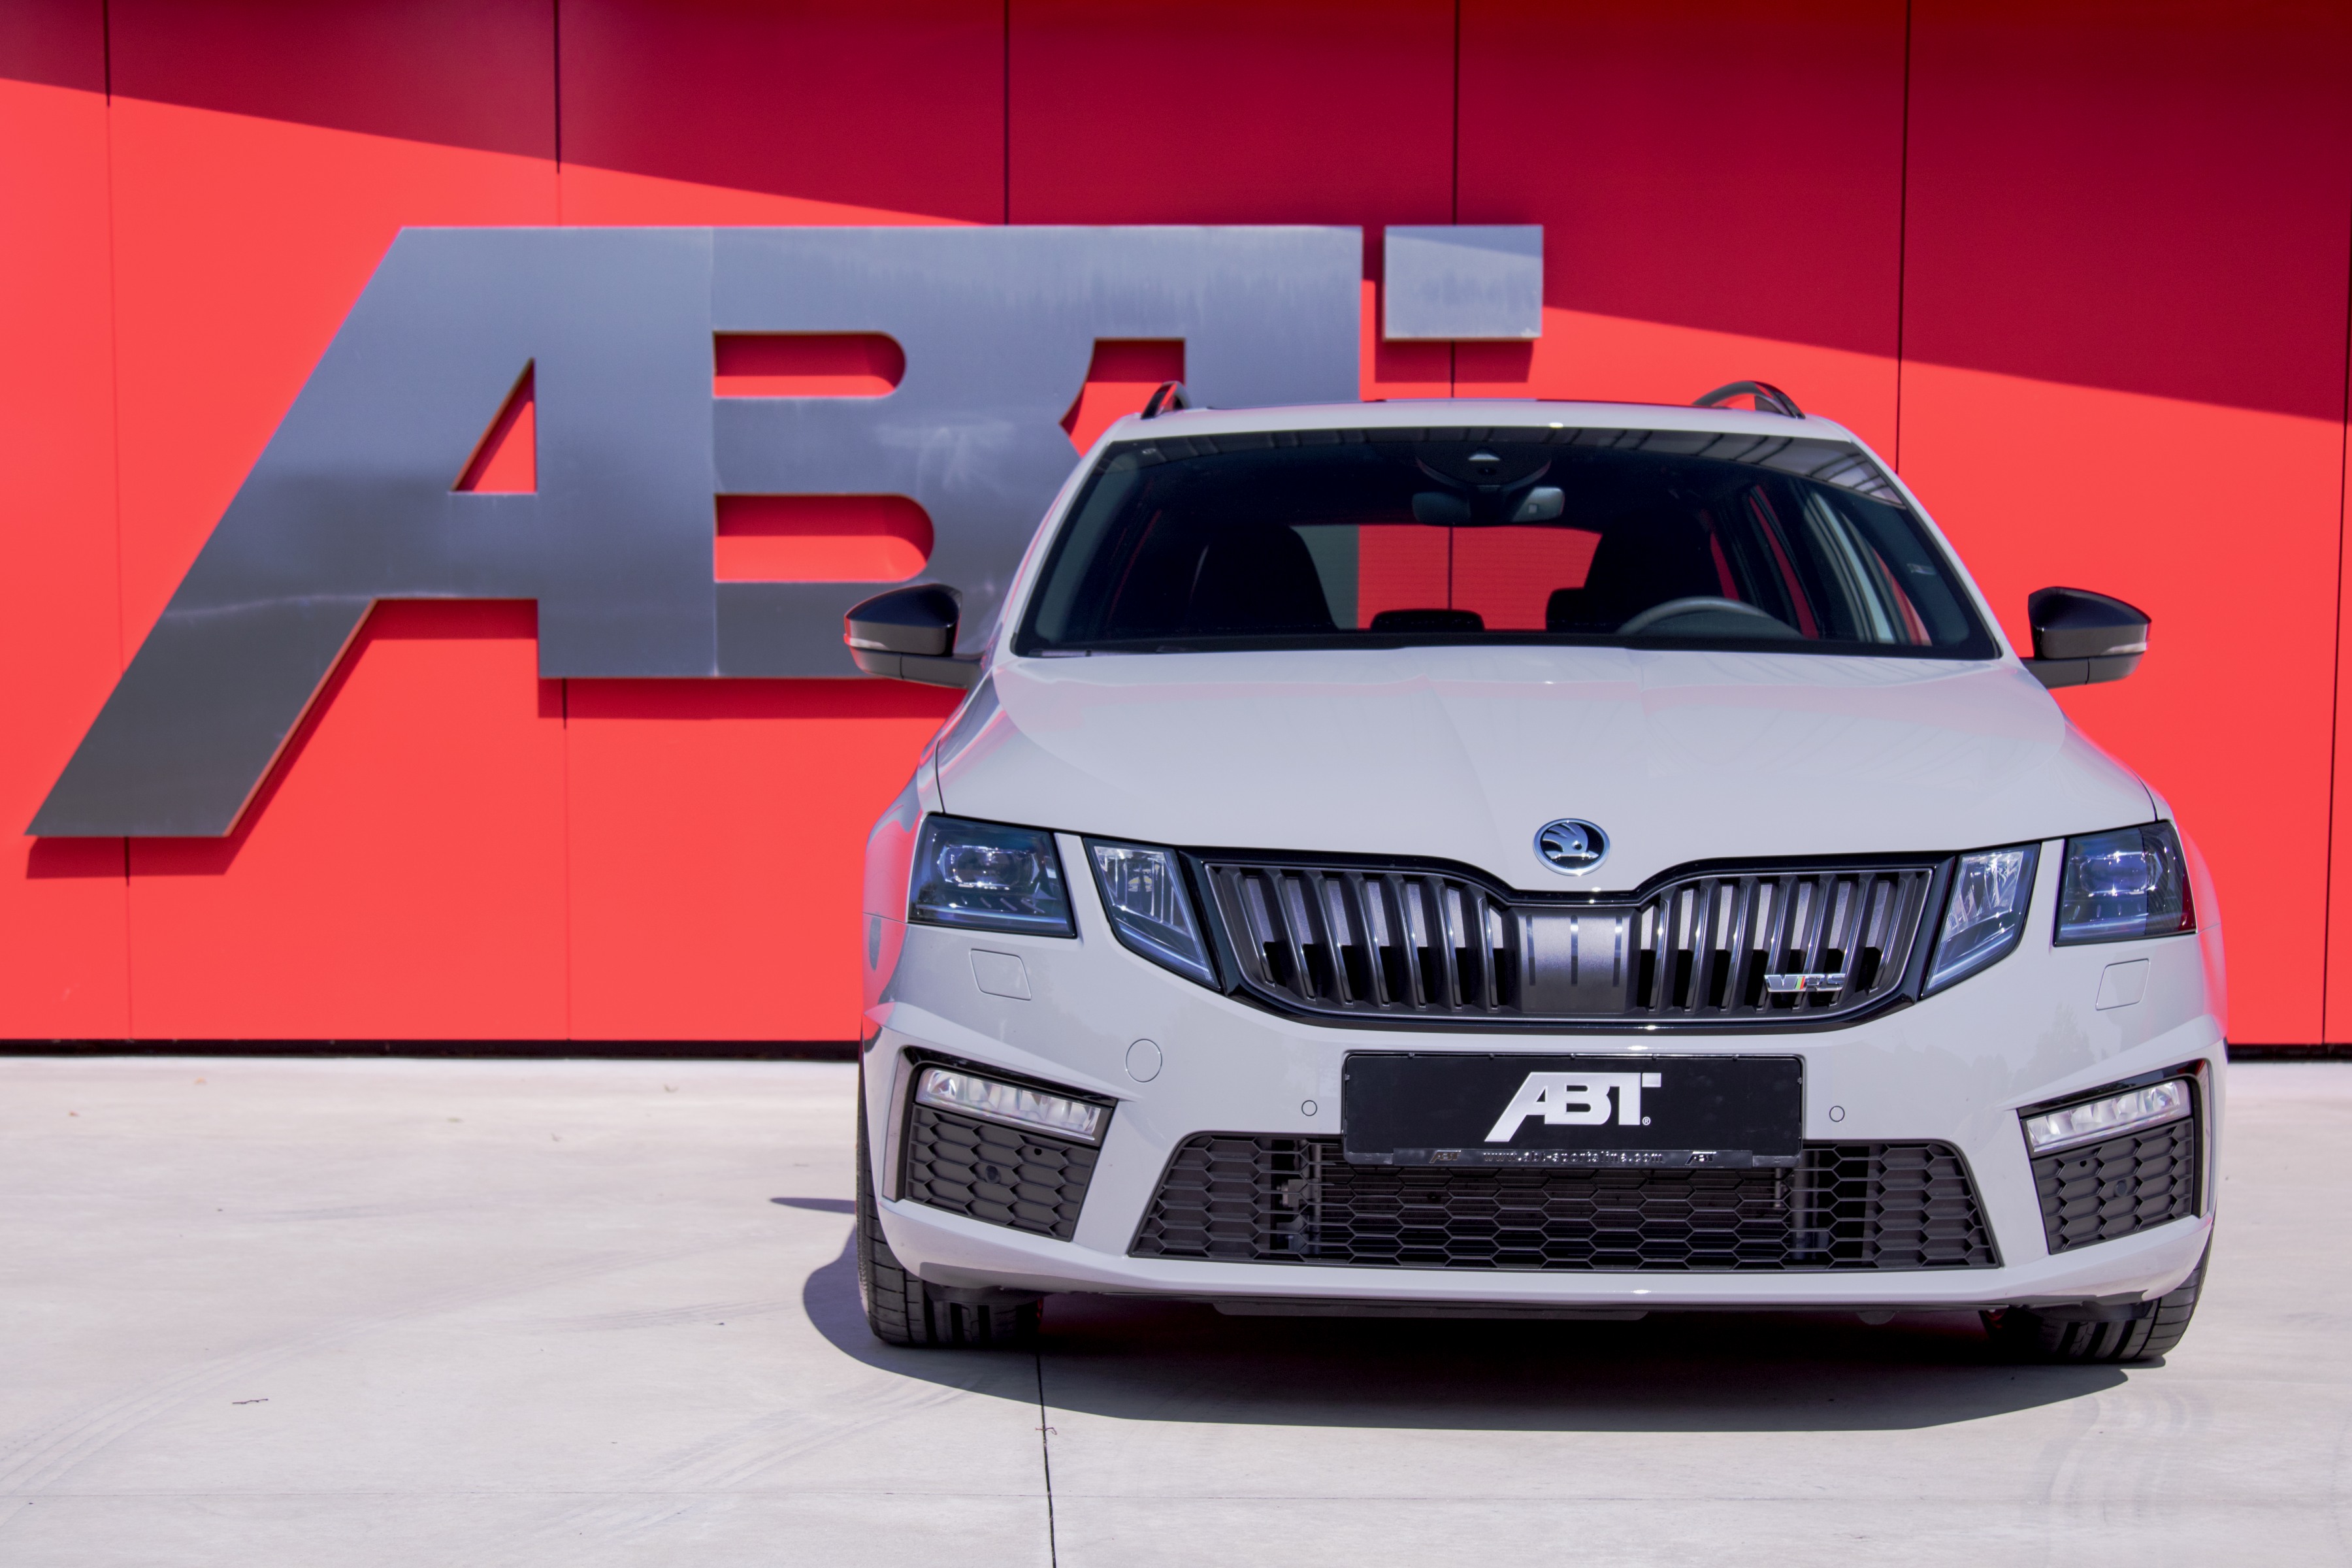 ABT equips the Skoda Octavia with 315 HP and other performance features -  Audi Tuning, VW Tuning, Chiptuning von ABT Sportsline.